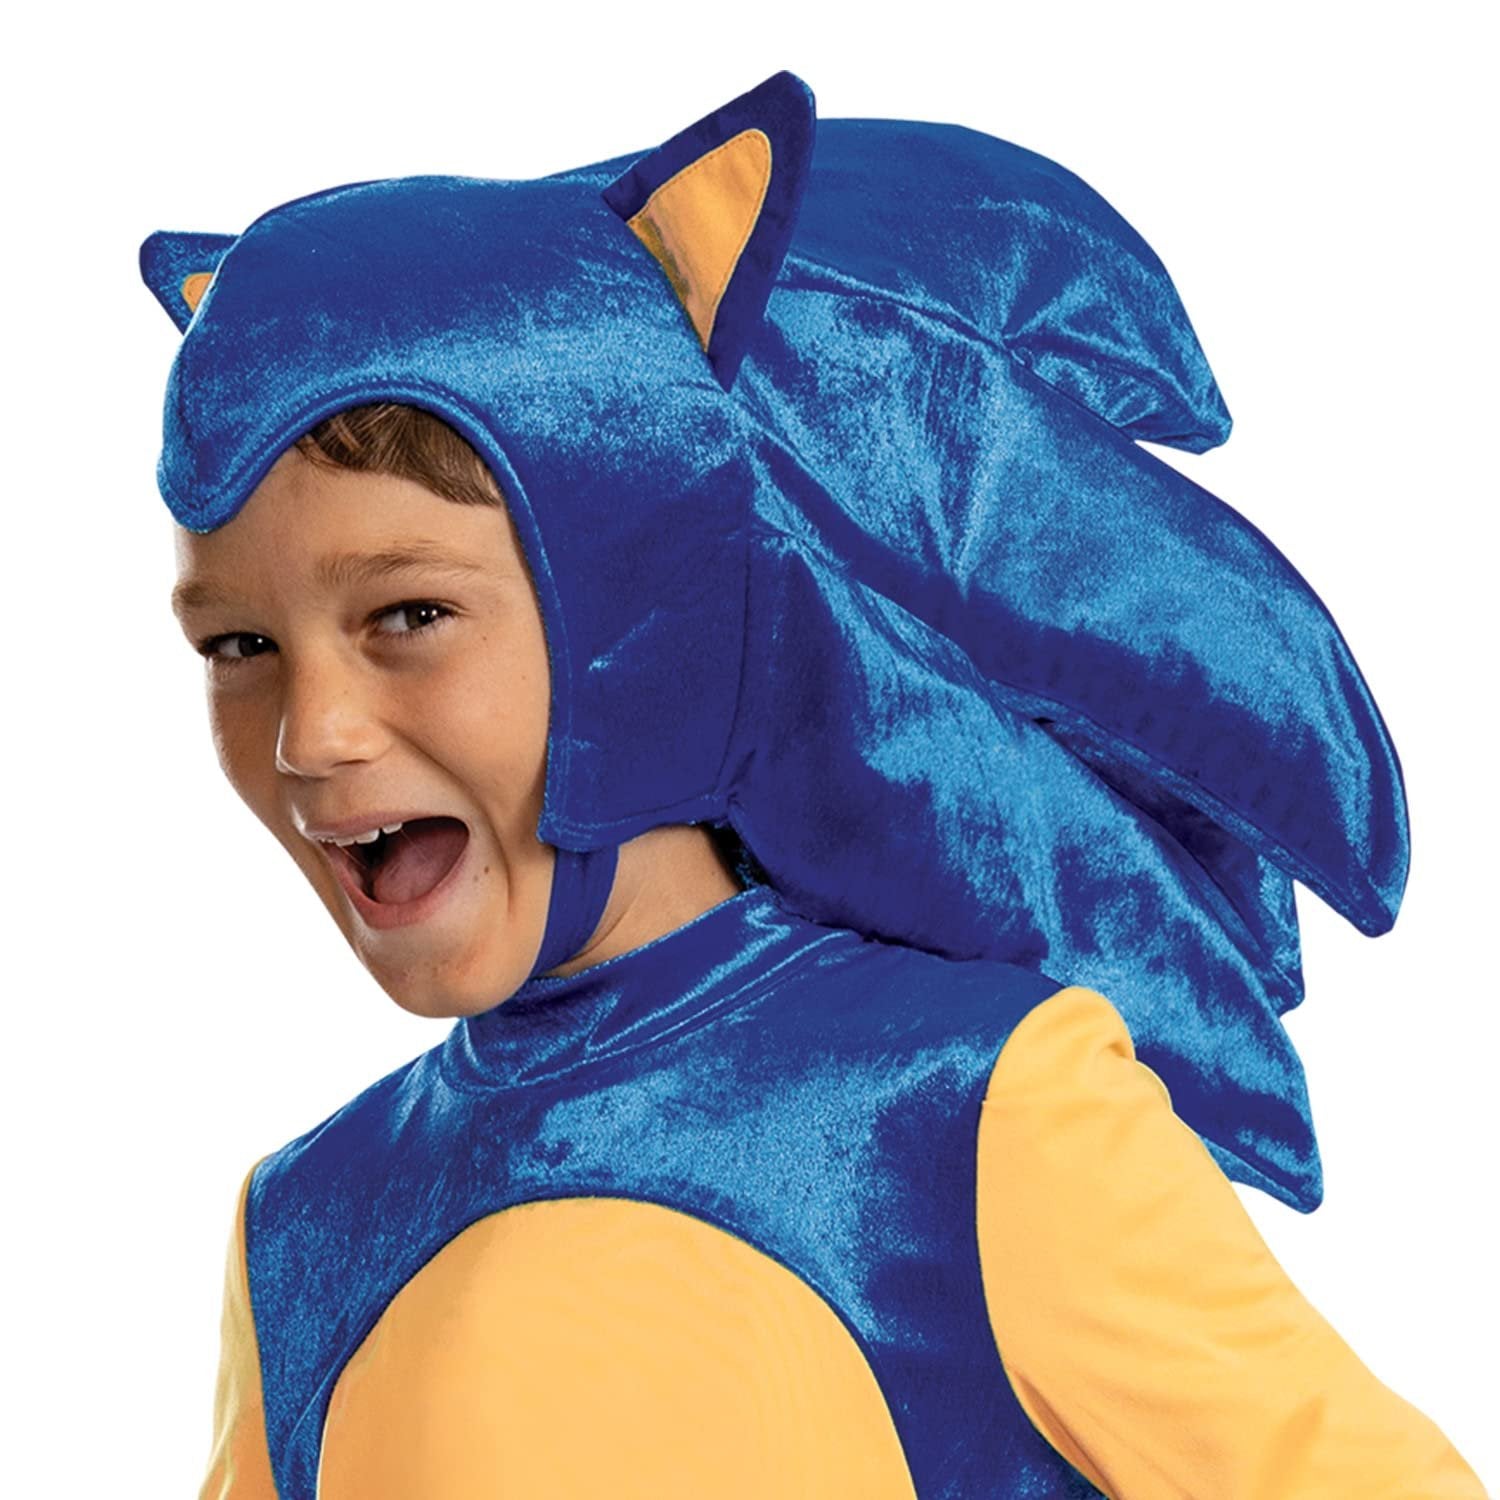 Disguise Deluxe Sonic Costume for Kids, Official Sonic Prime Costume and Headpiece, Size (10-12)